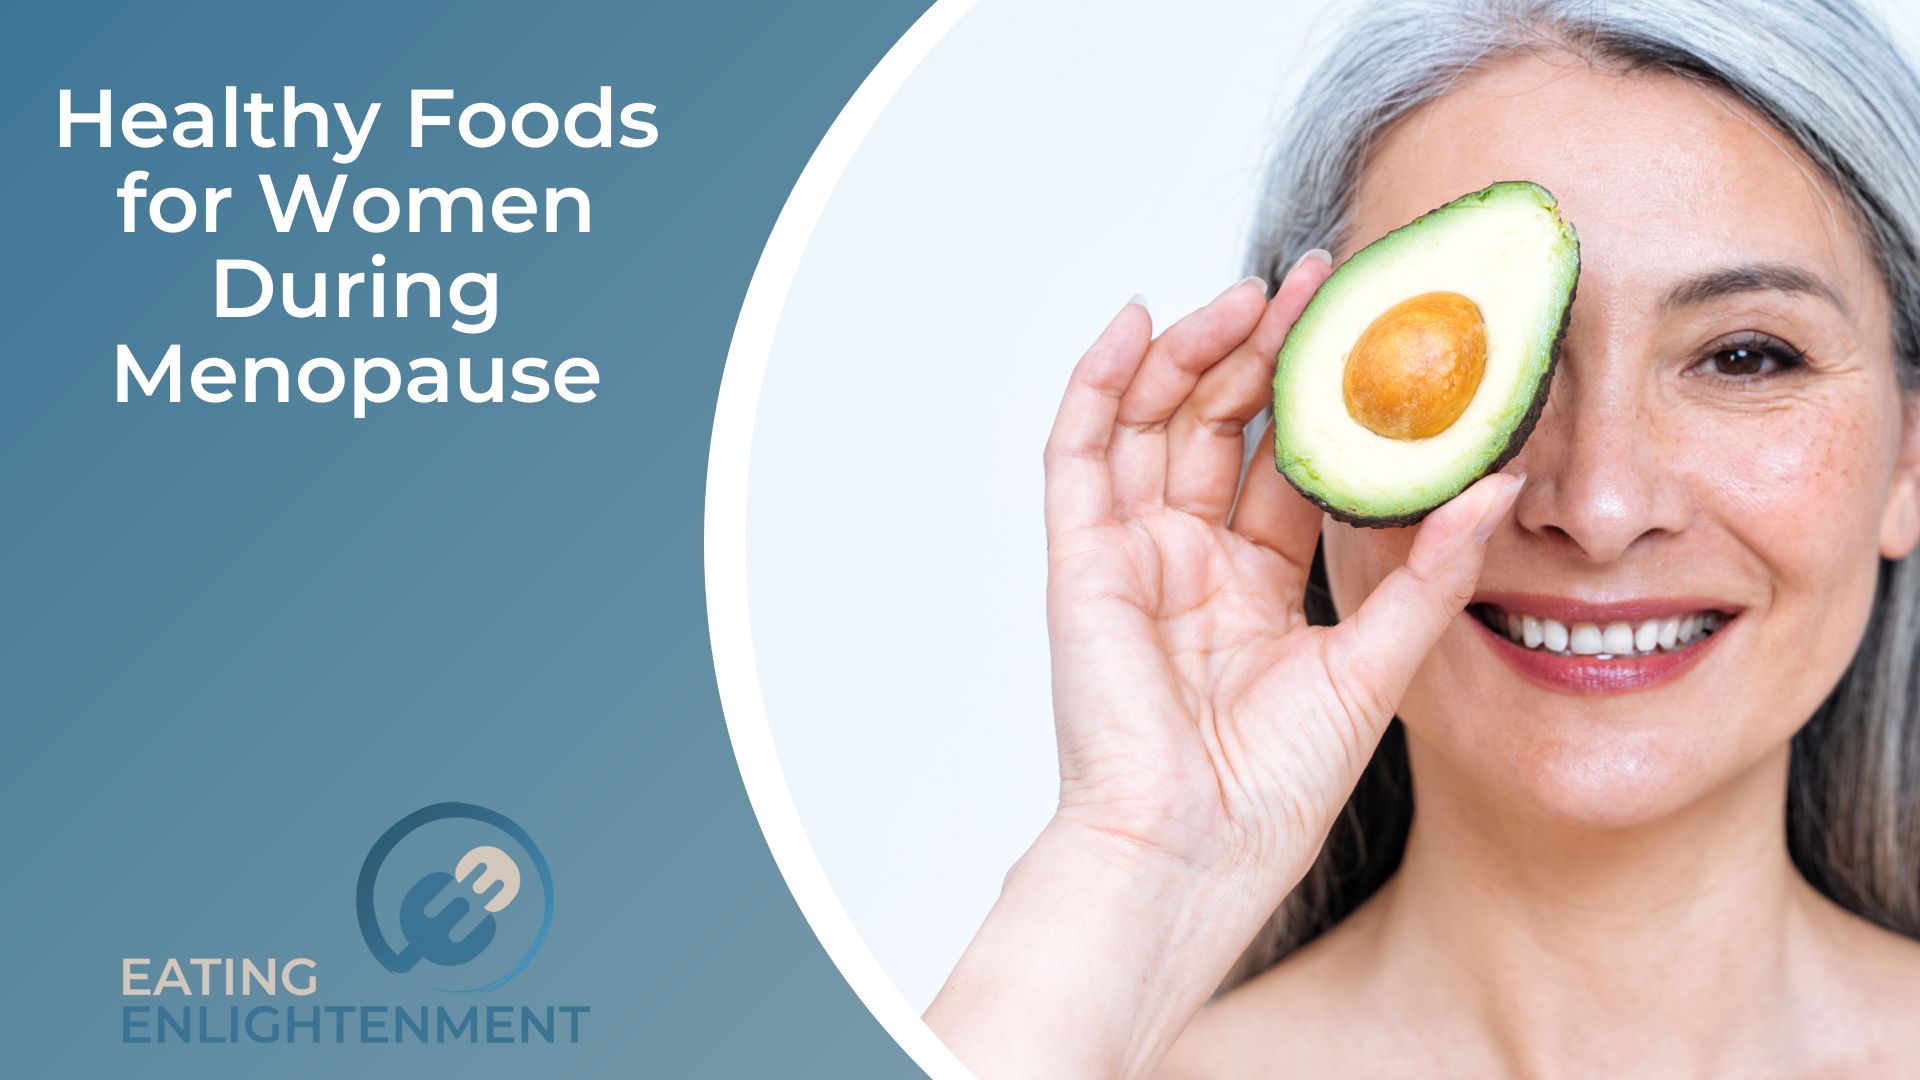 5 Healthy Foods for Women During Menopause